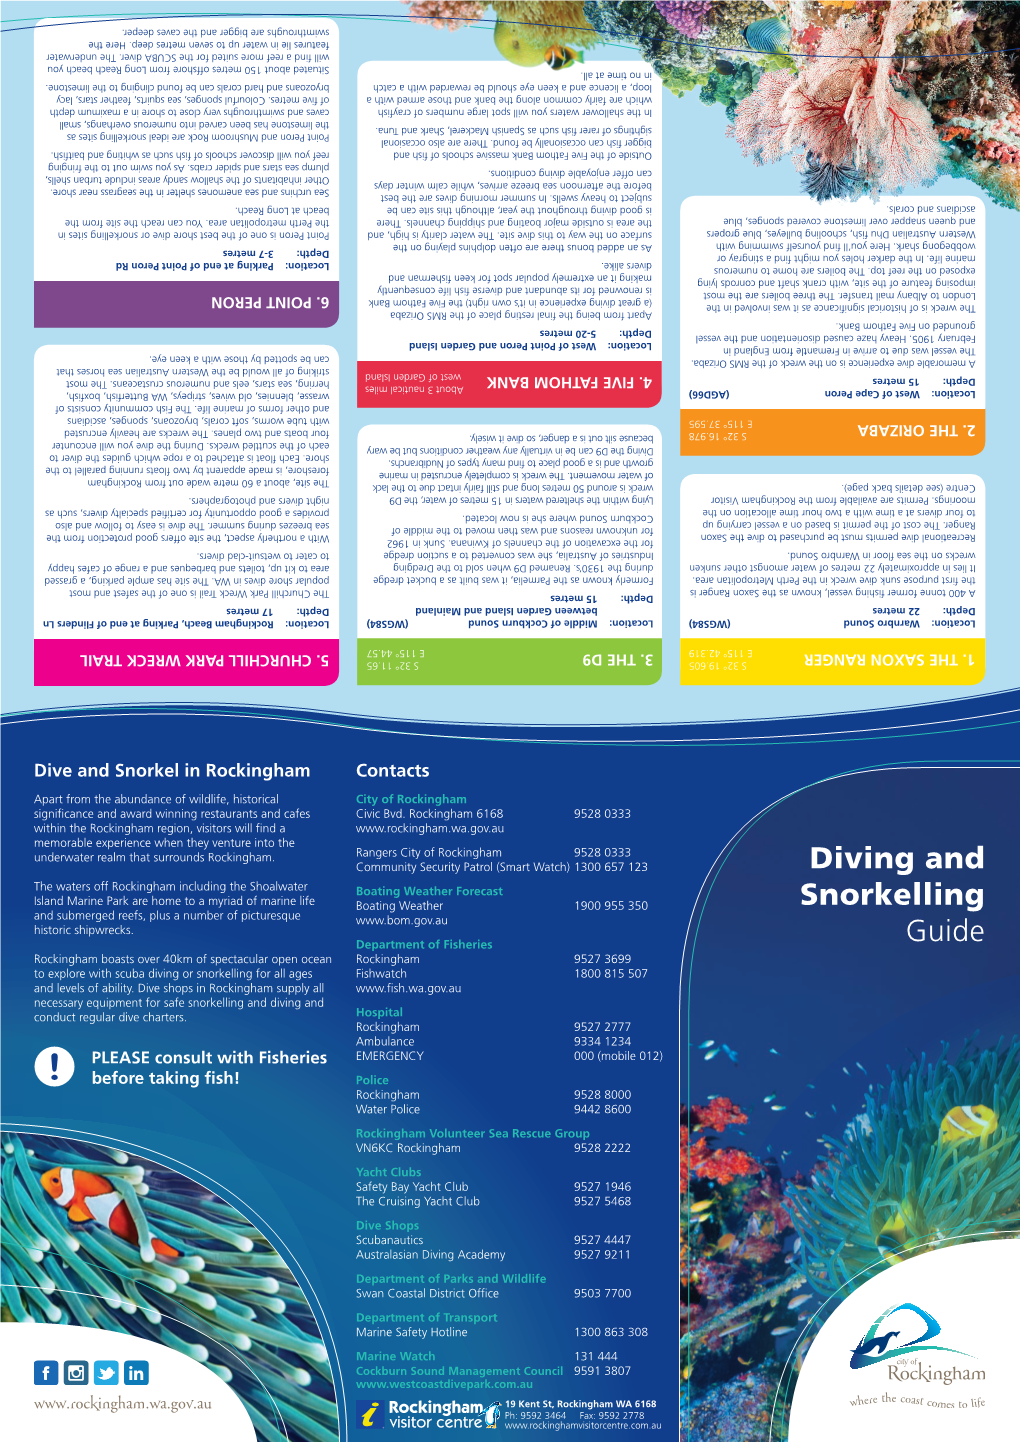 Diving and Snorkelling Guide